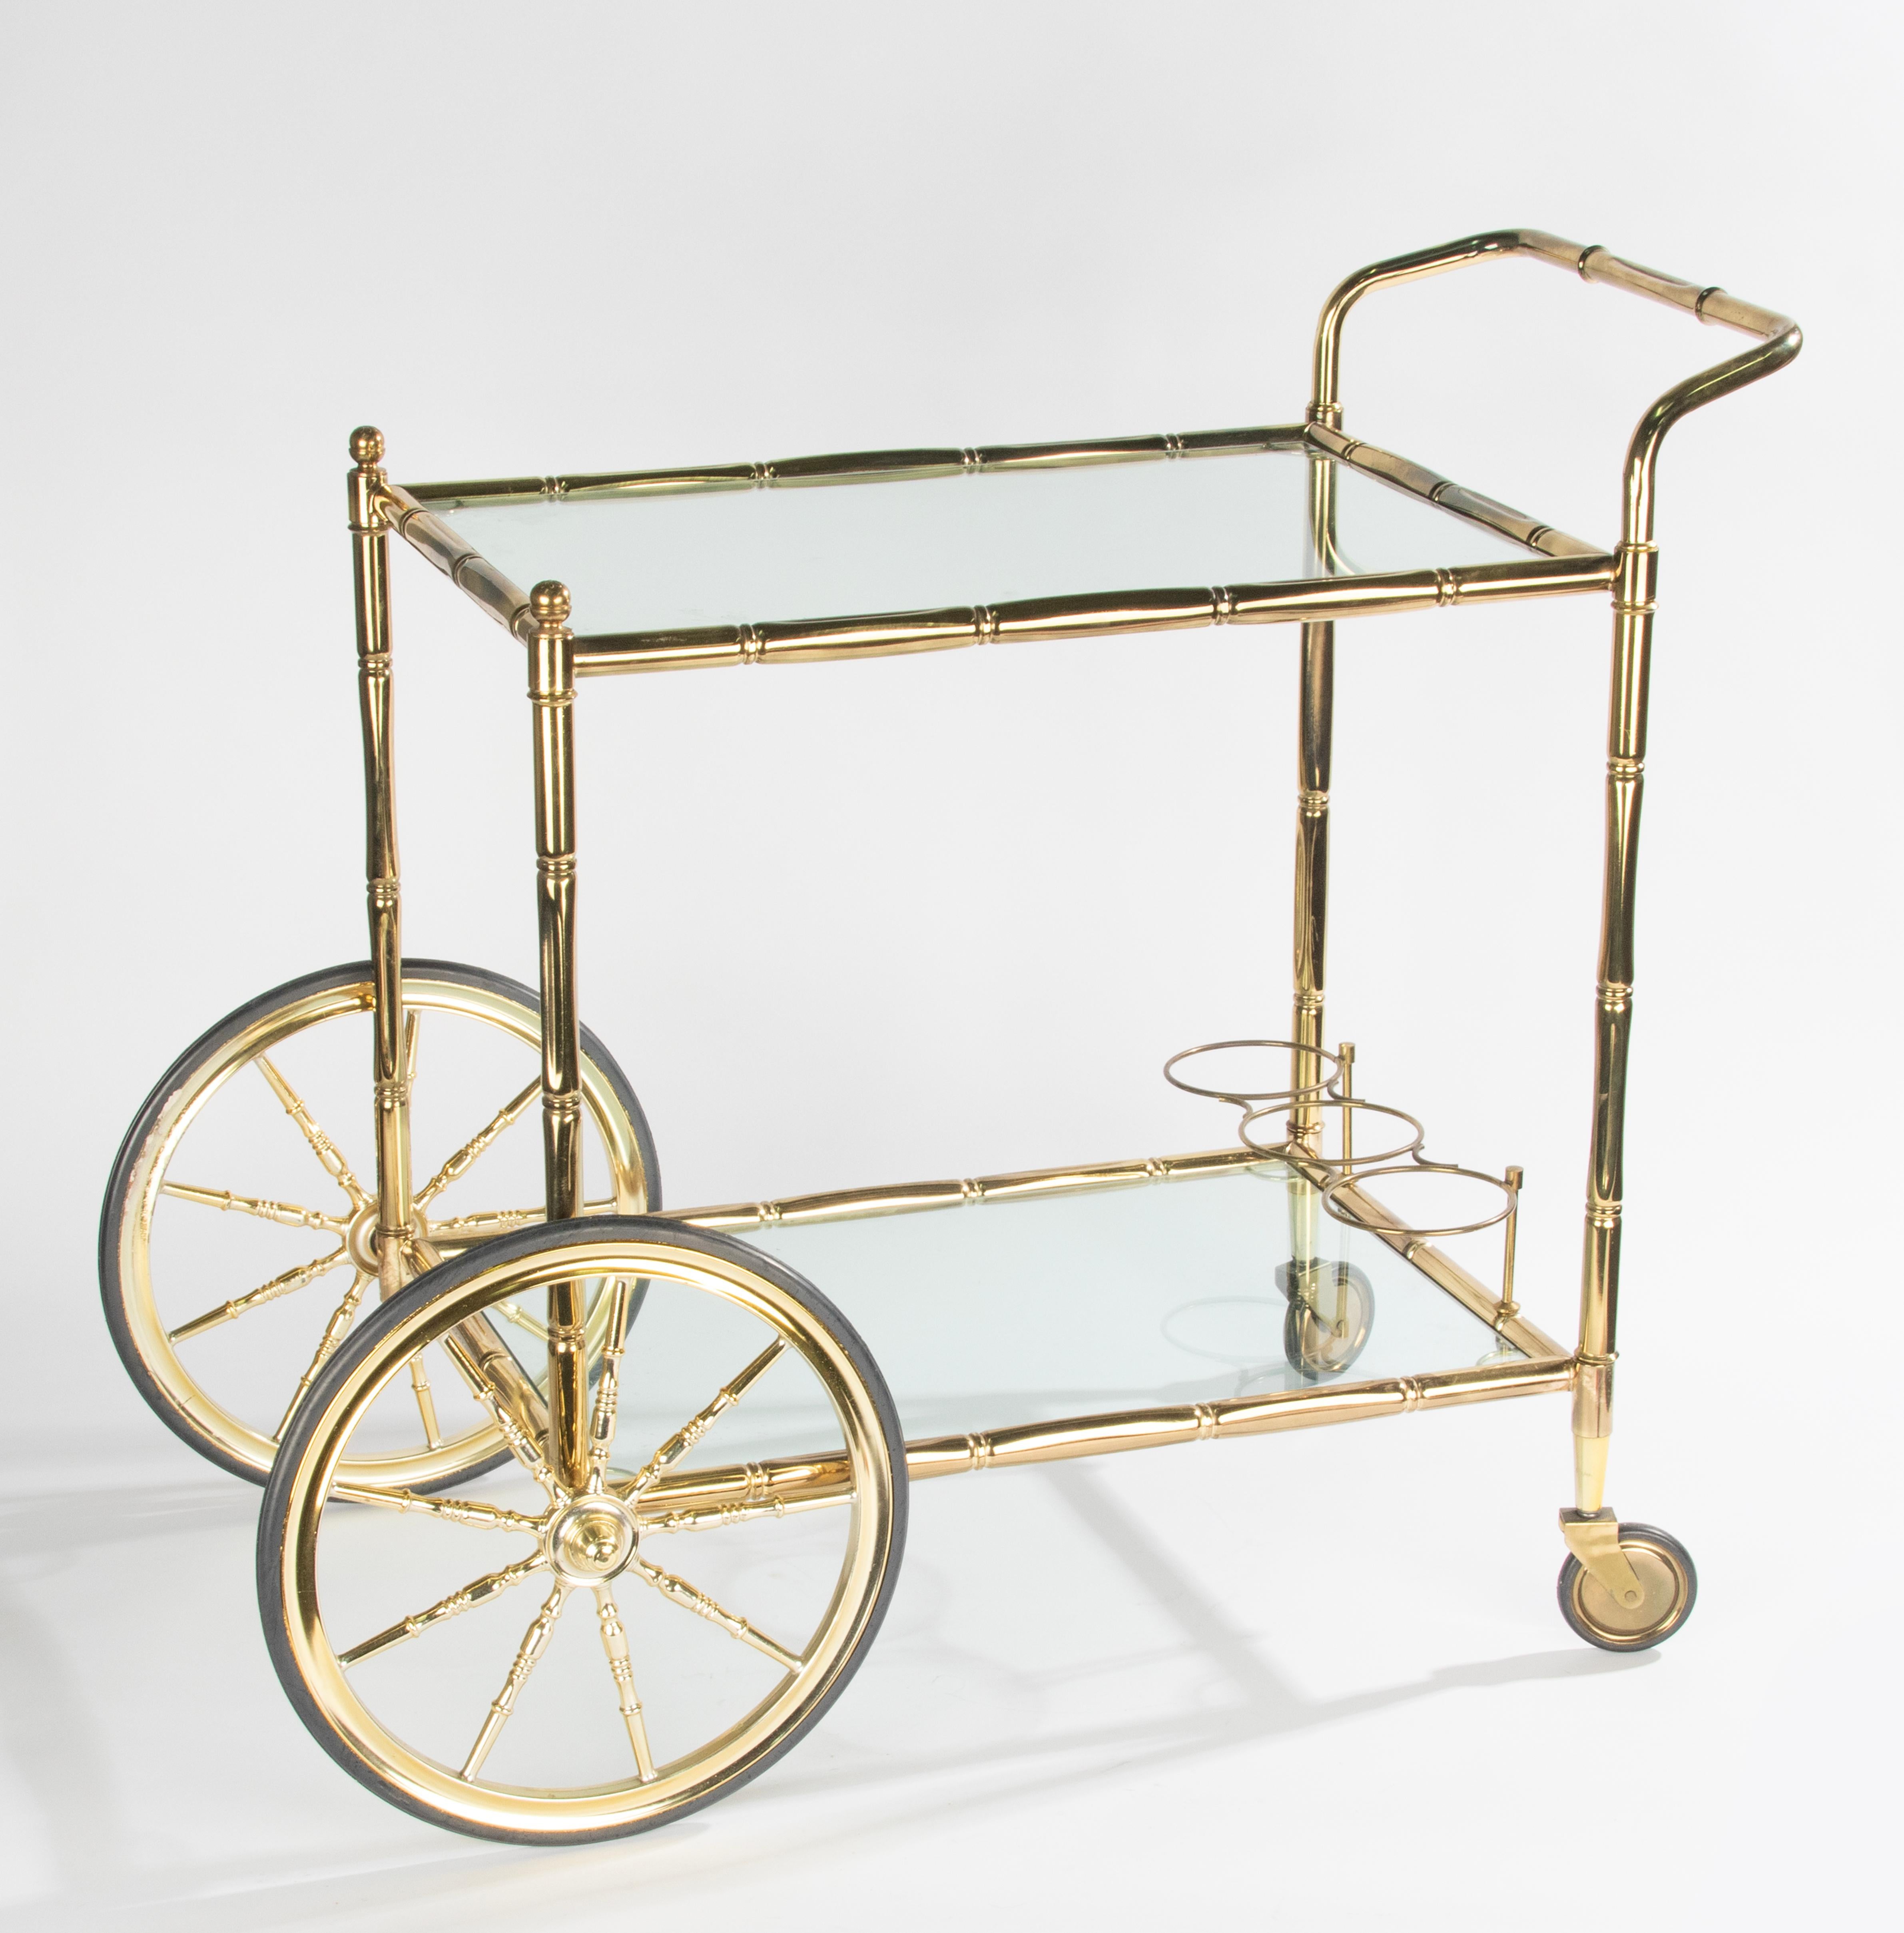 Elegant bar faux bamboo cart with two tiers with glass. The trolley is made of brass colored metal and glass, with beautiful details. Brass patina and glass are in good condition. Sturdy and rolling smoothly. Made in Belgium, 1970-1980
Dimensions: